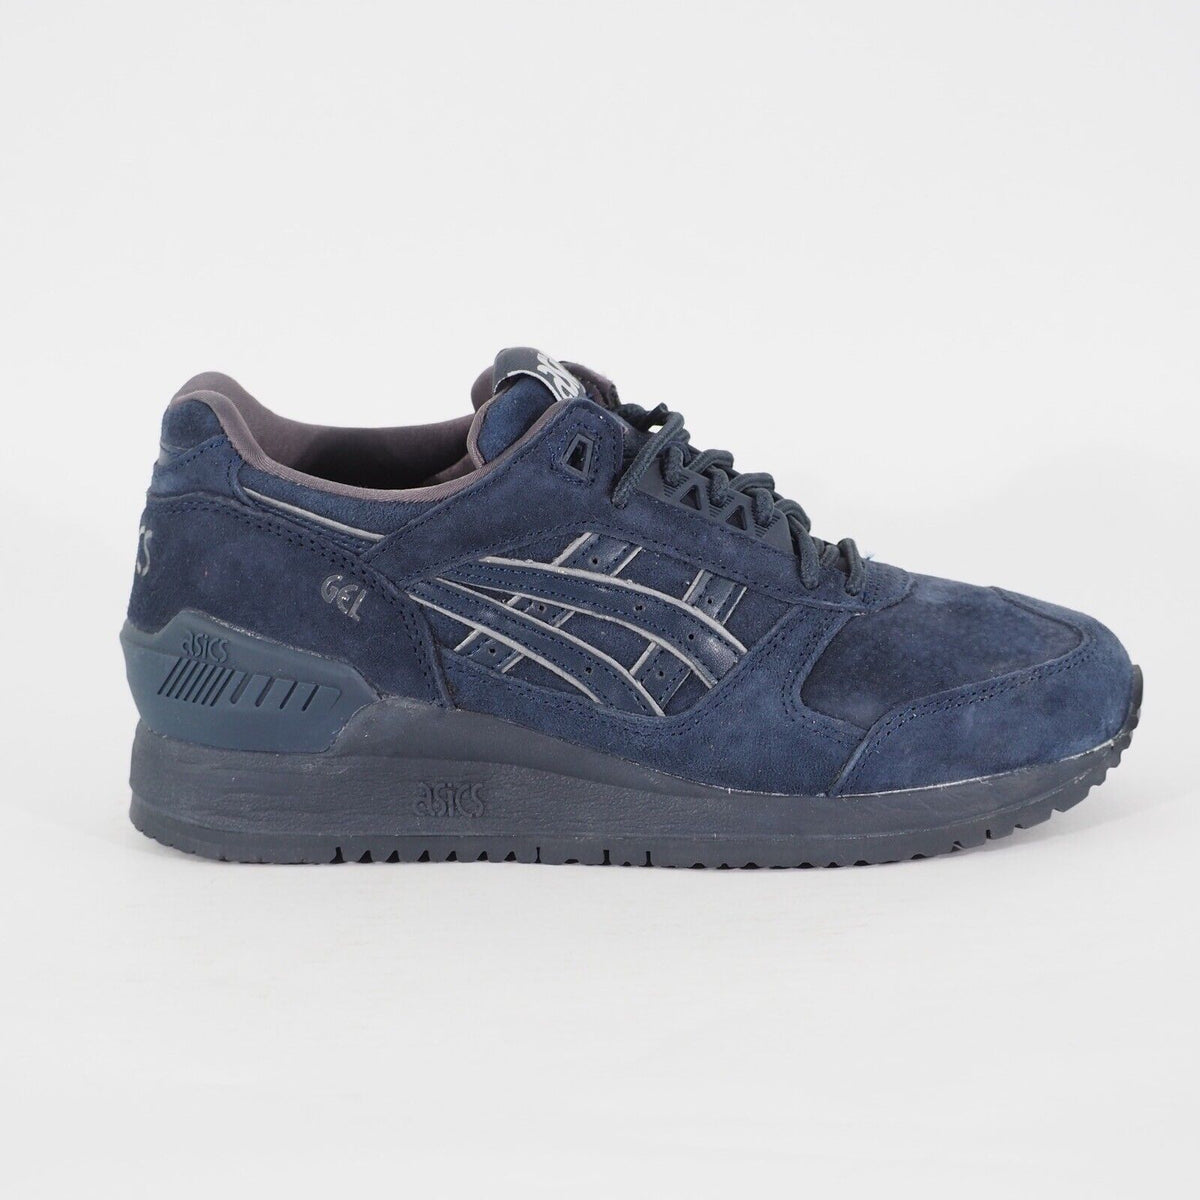 Adults Asics Gel Respector H6B4L Navy Leather Casual Lace Up Walking Trainers